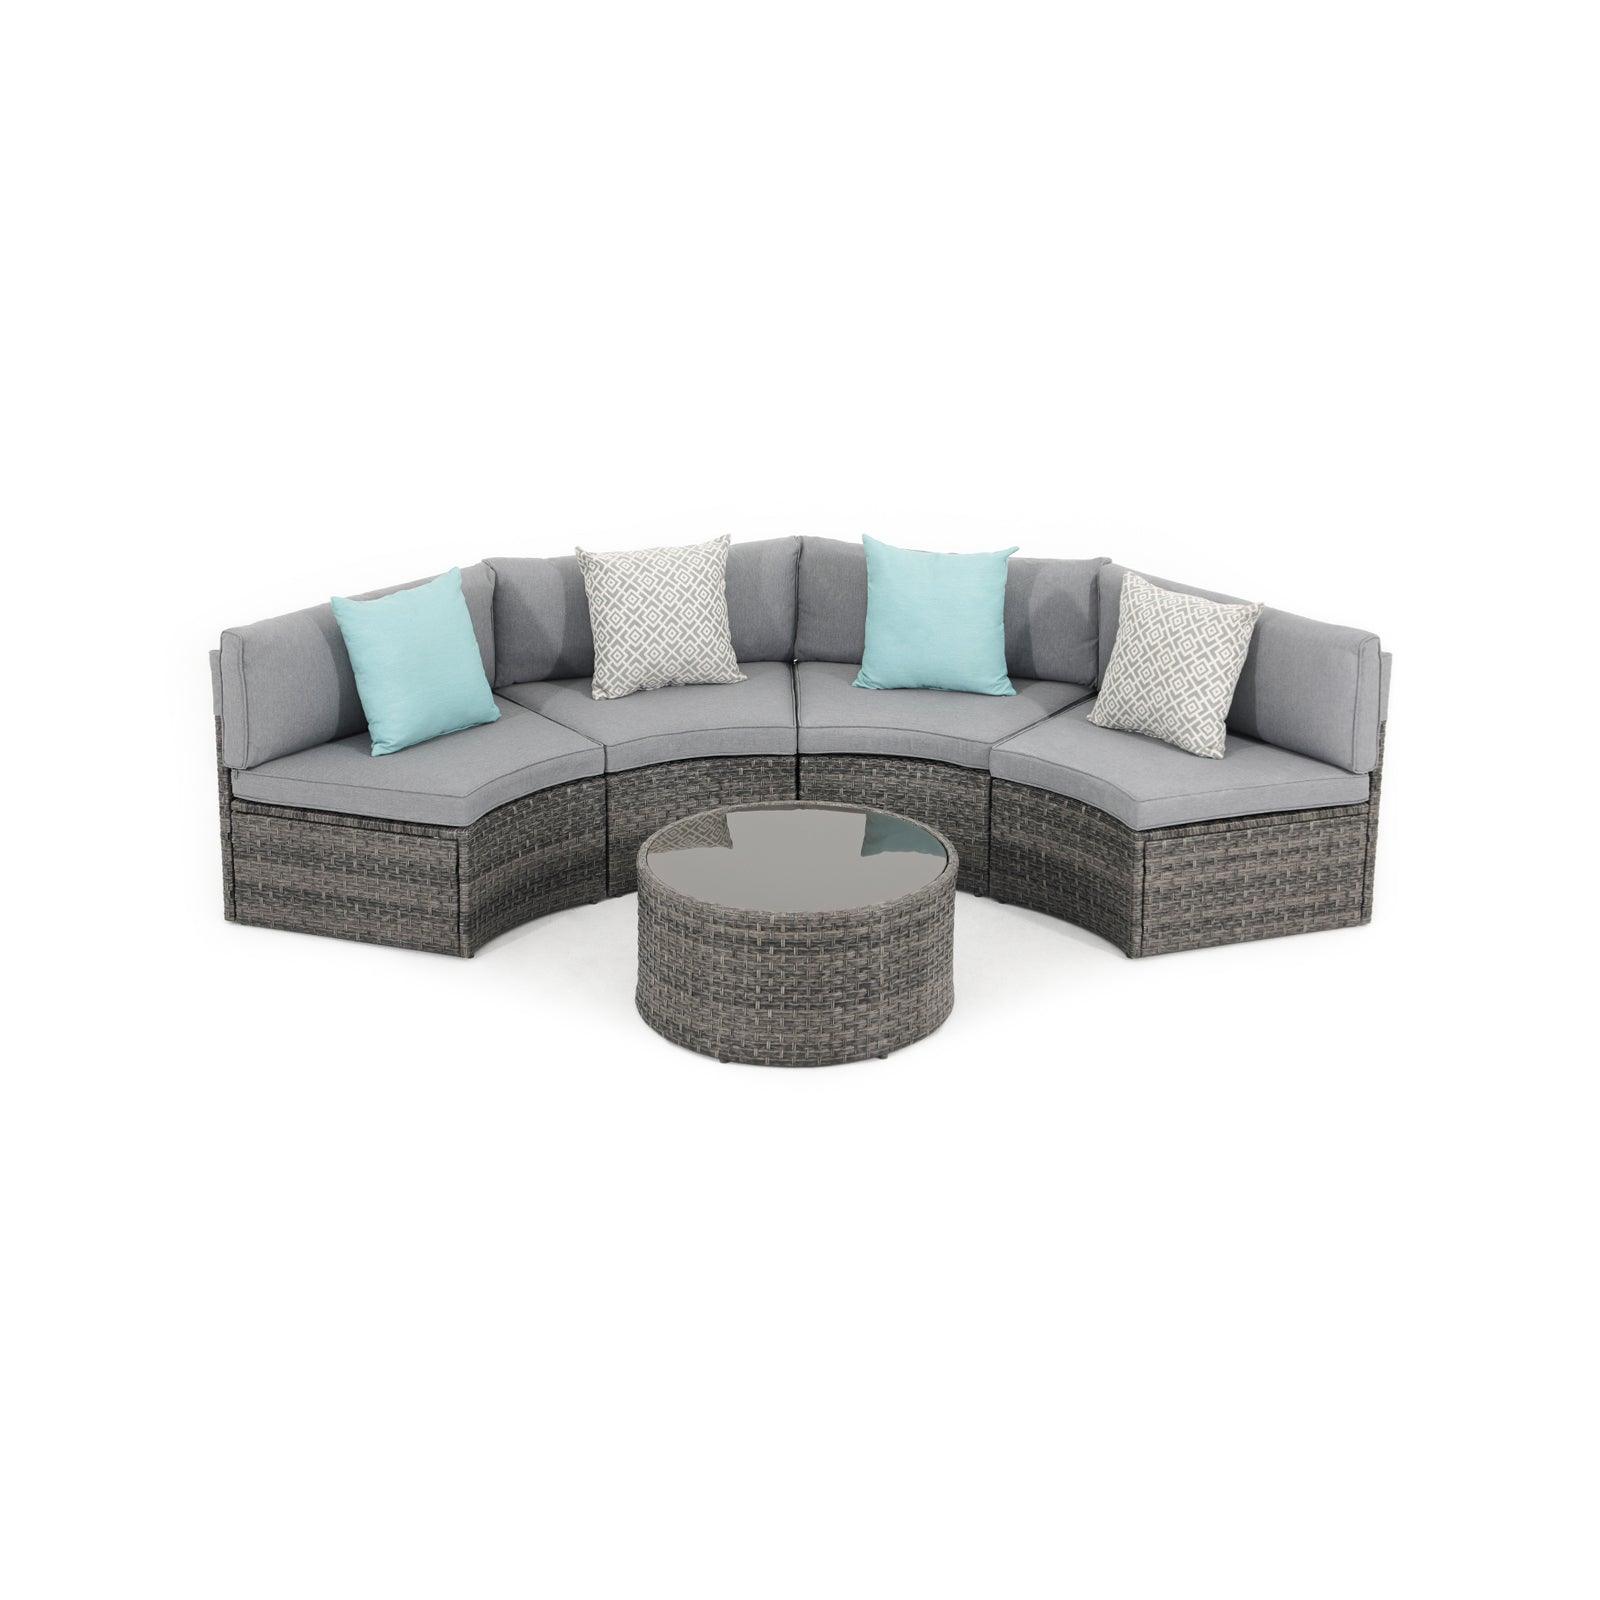 Boboli 5-piece Grey Wicker Curved Sectional Set with grey cushions, 1 Round Glass Table, 4 sectional sofas, front- Jardina Furniture #color_Grey #piece_5-pc.